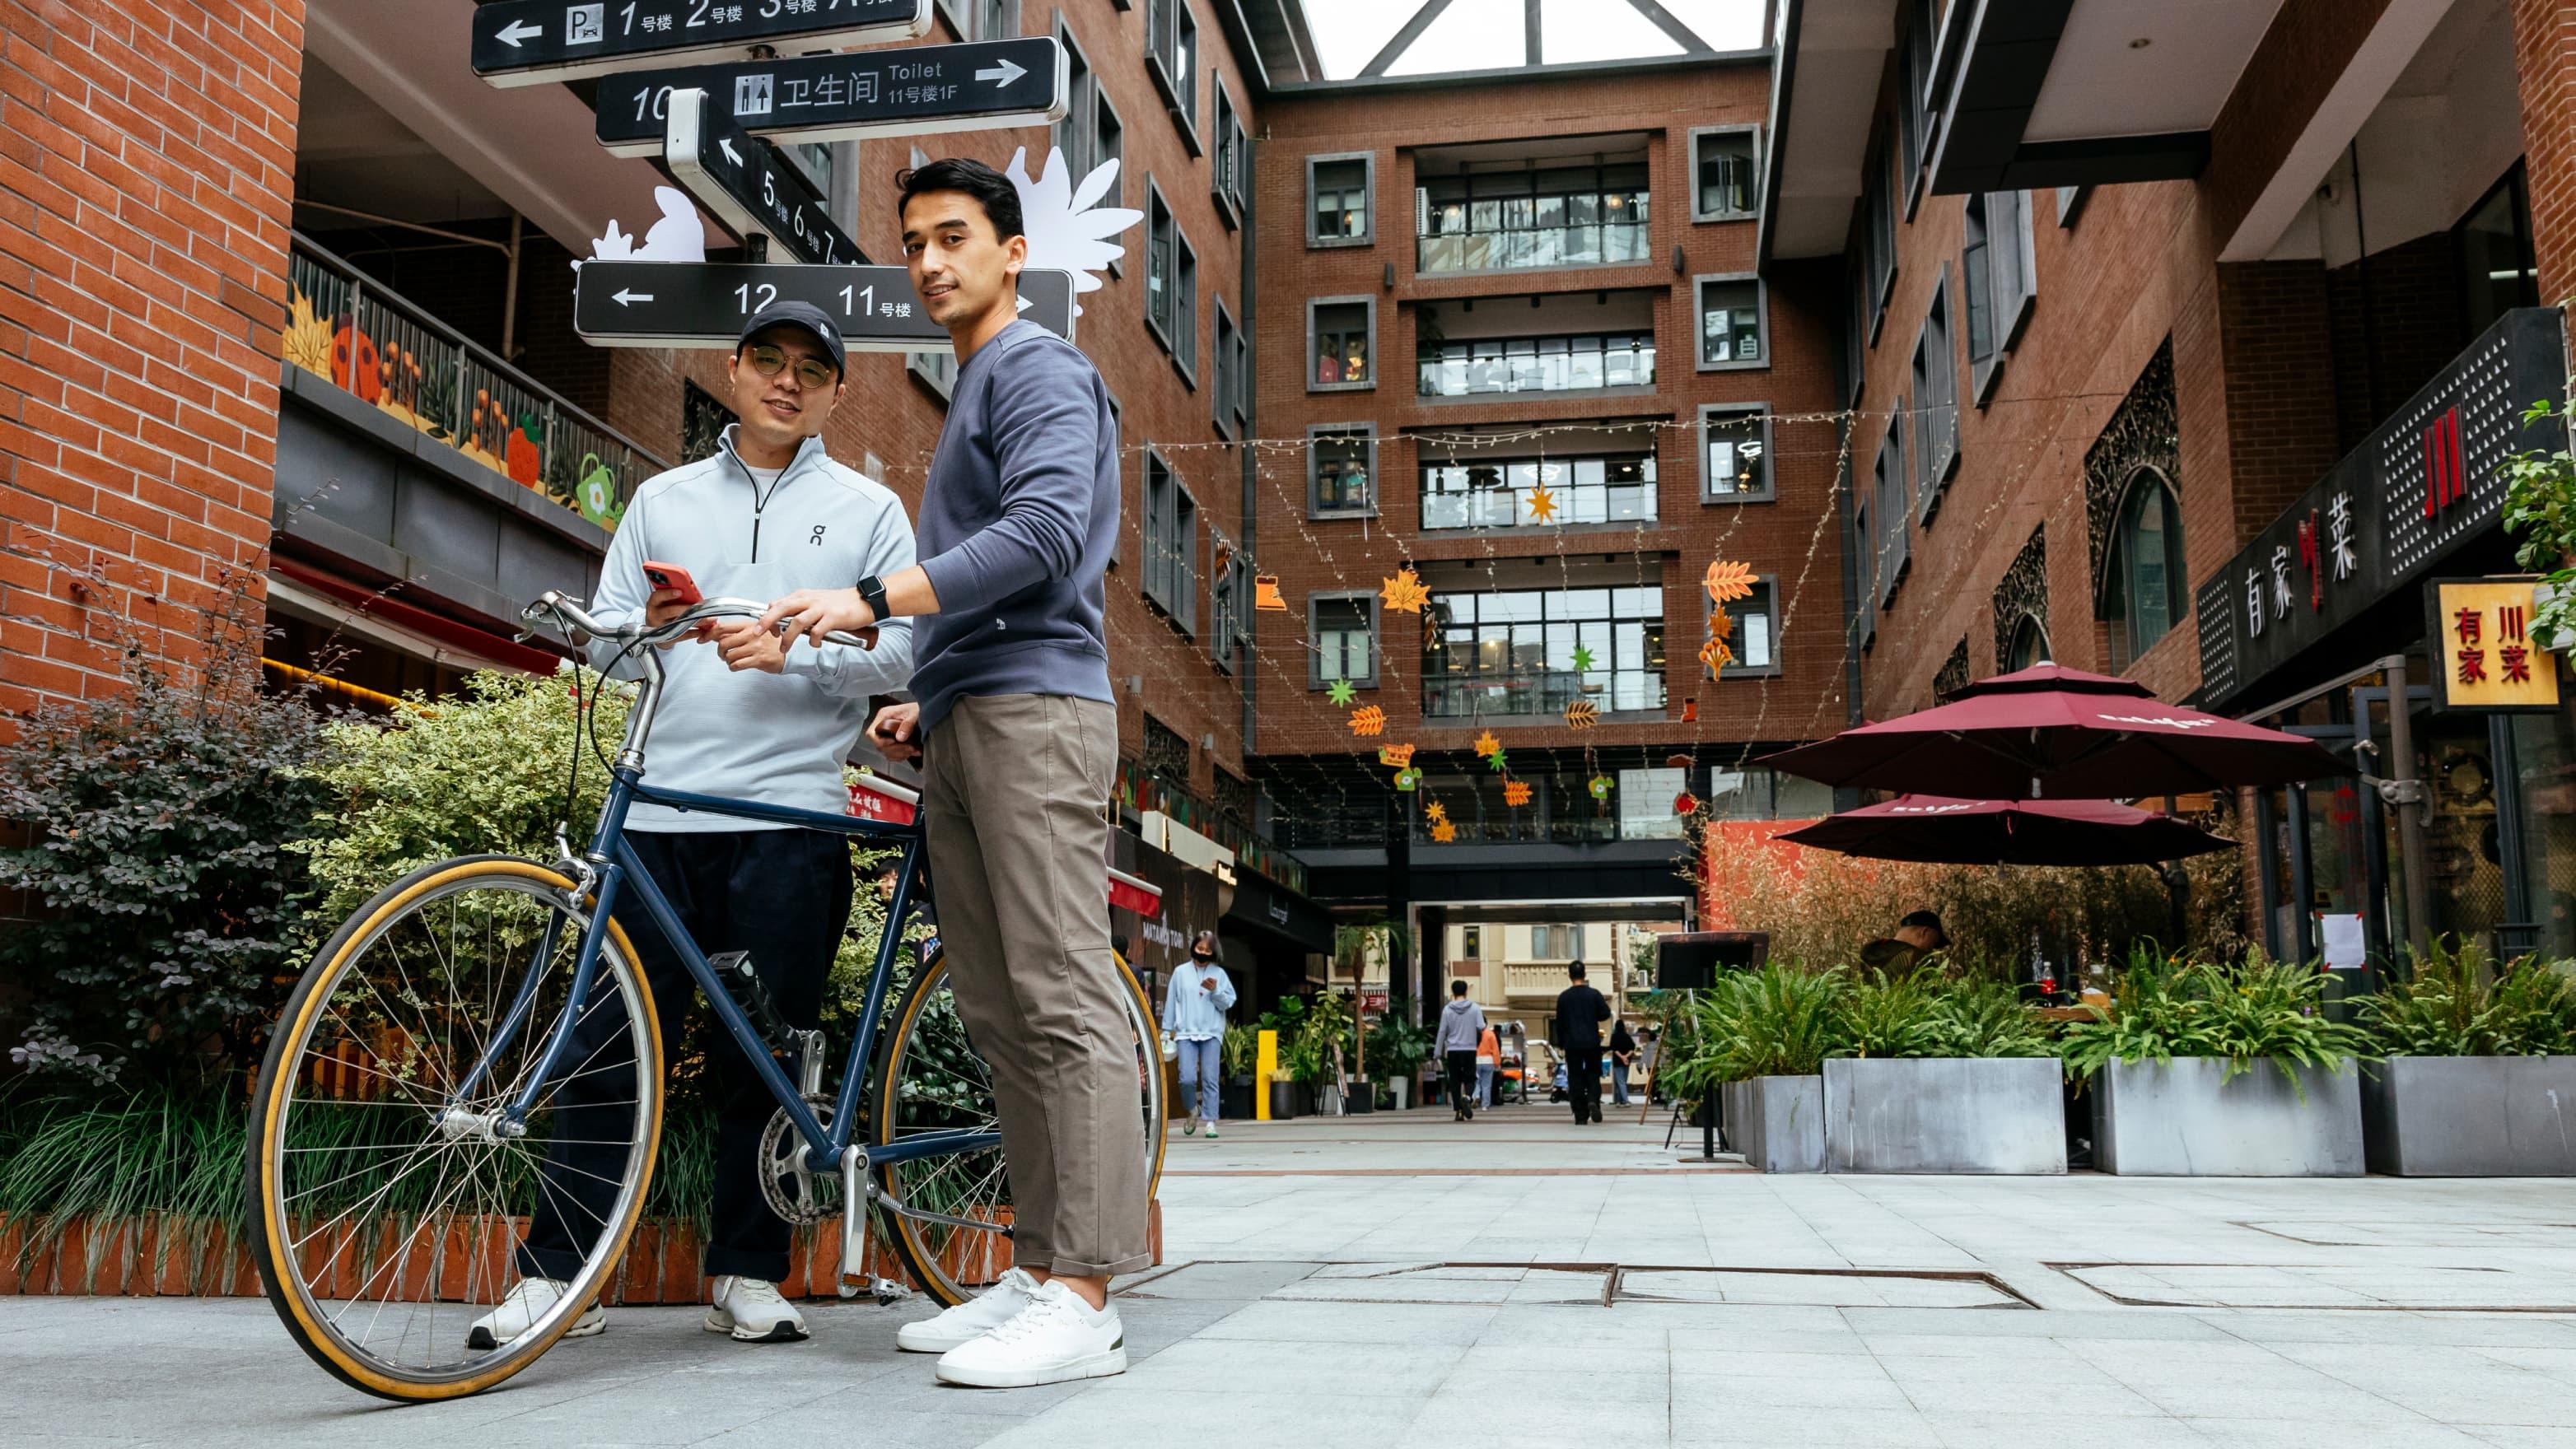 Two men stand and smile near the bicycle outside